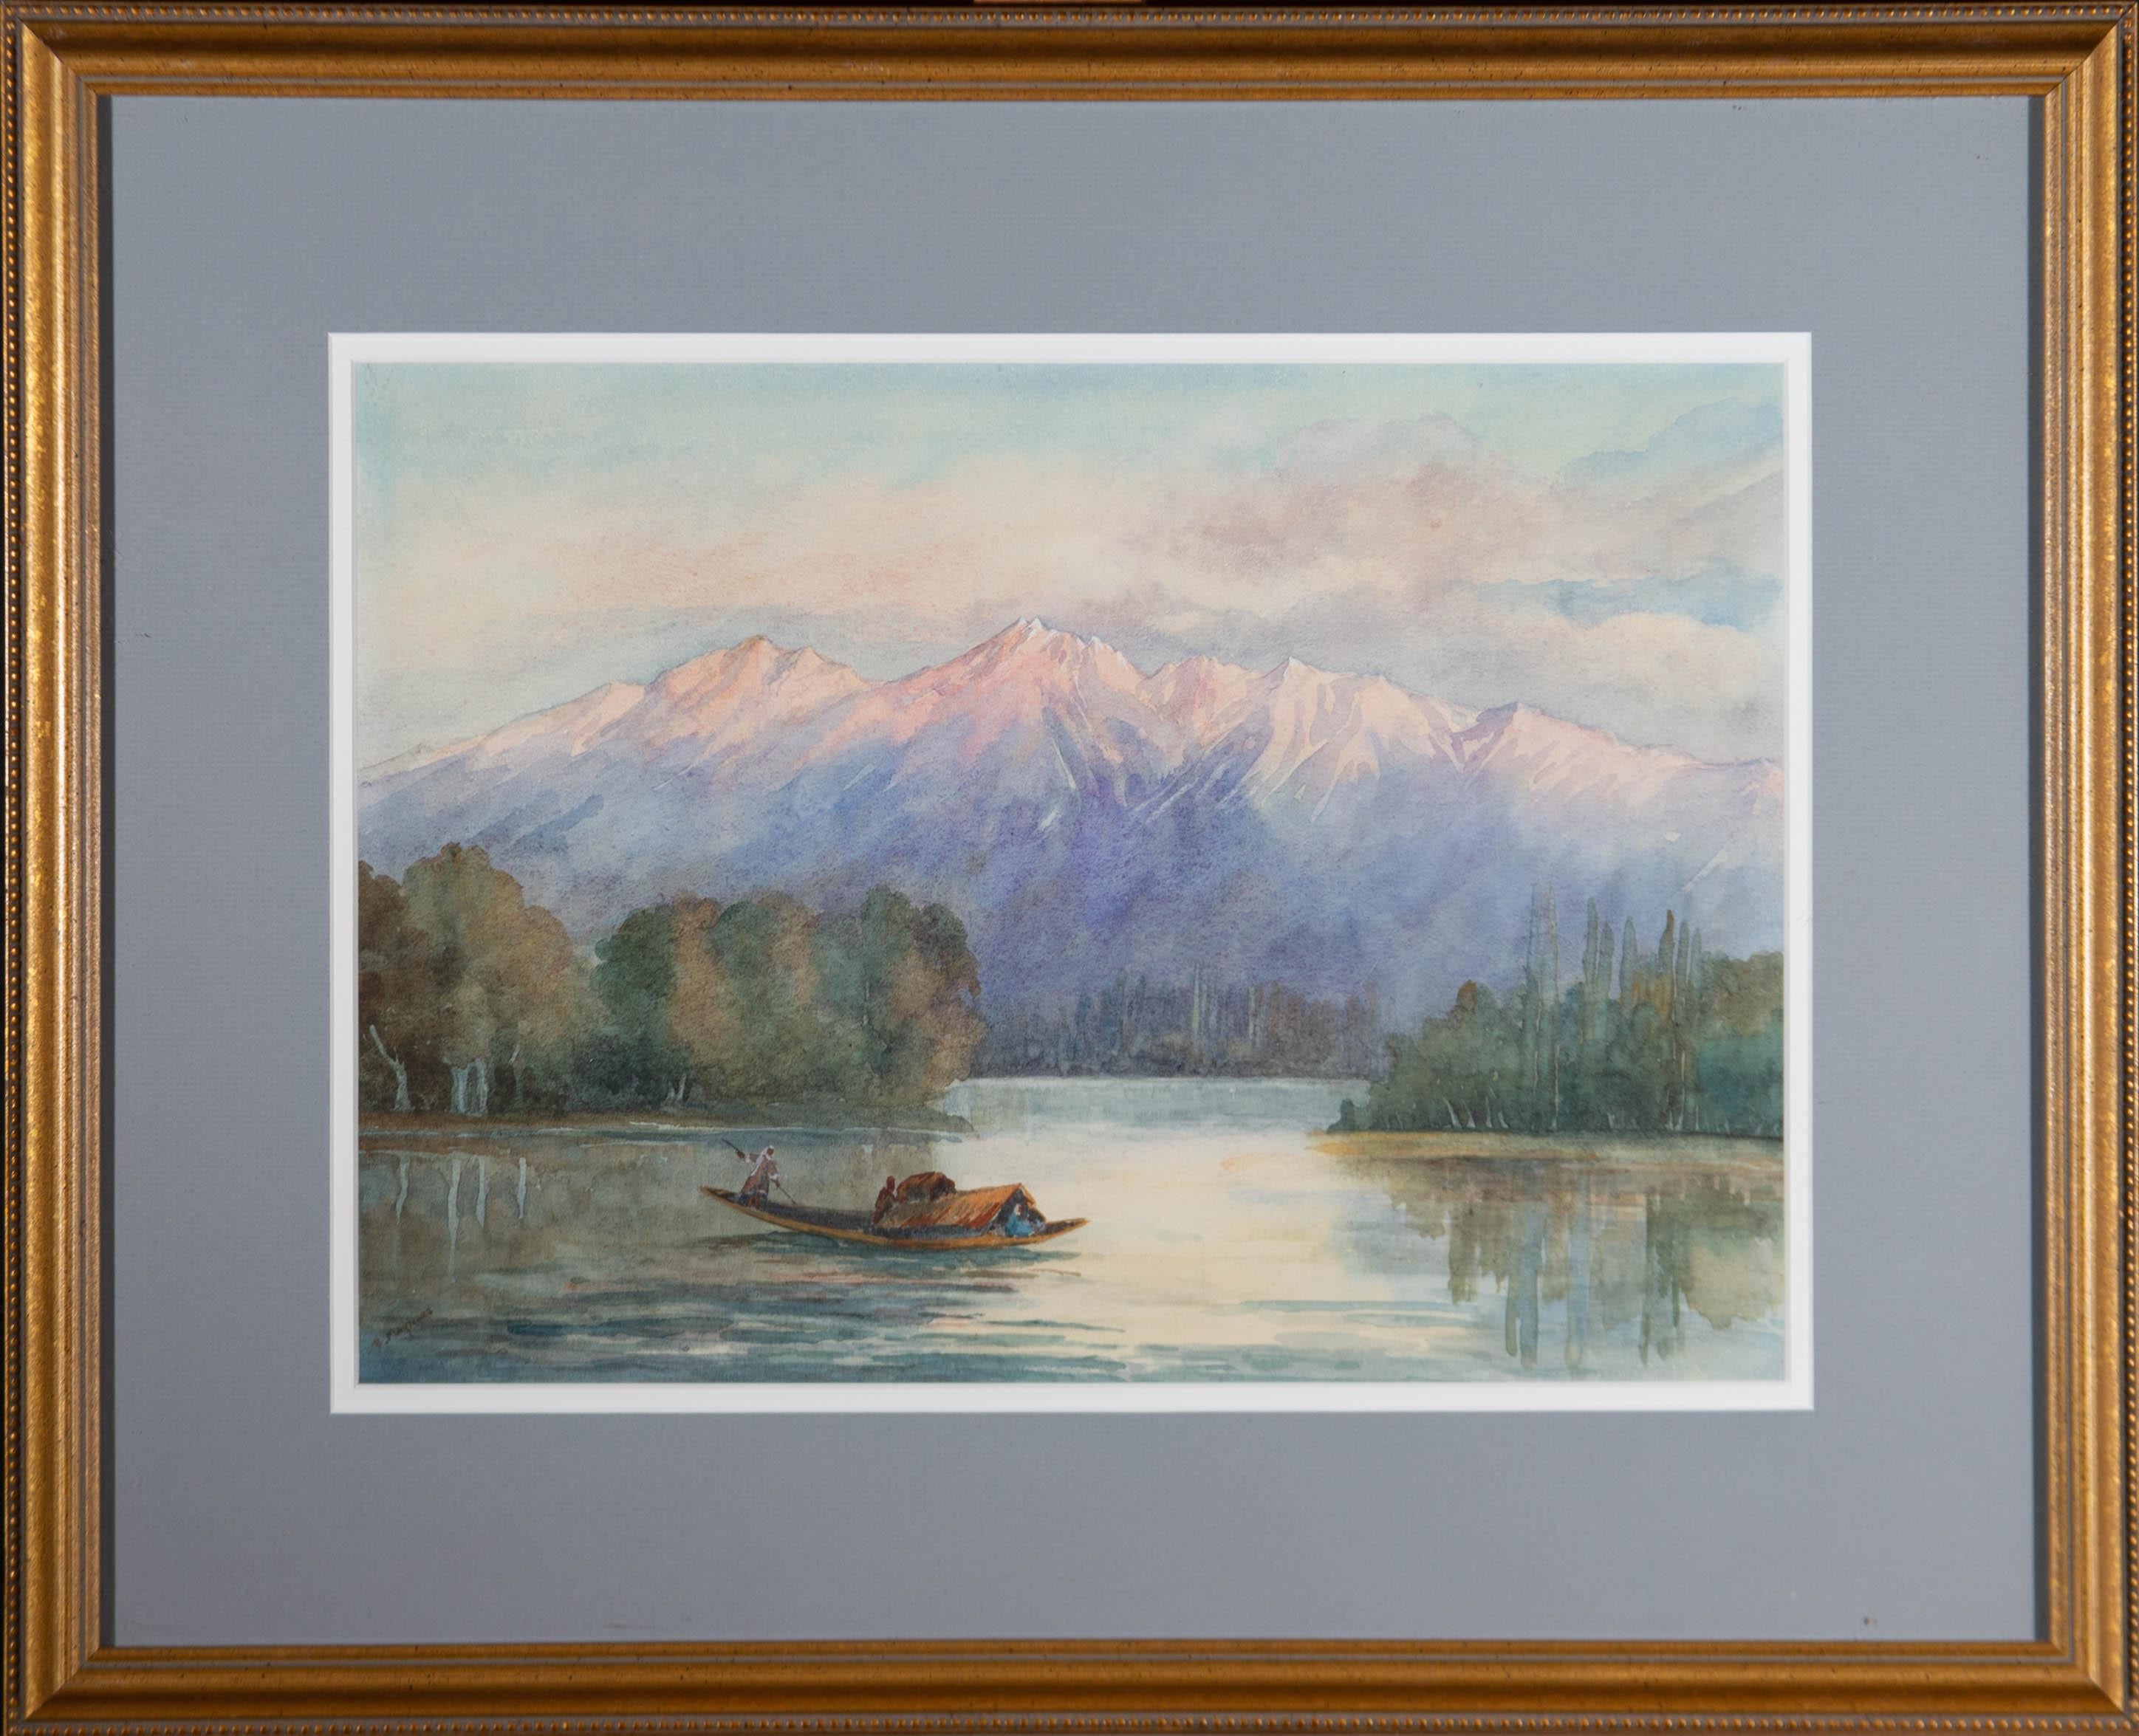 A fine watercolour painting by B. Maynard, depicting a mountainous lake scene with a boat and figures. Signed to the lower left-hand corner. Well-presented in a grey on white double card mount and in a speckled gilt effect frame, as shown. On